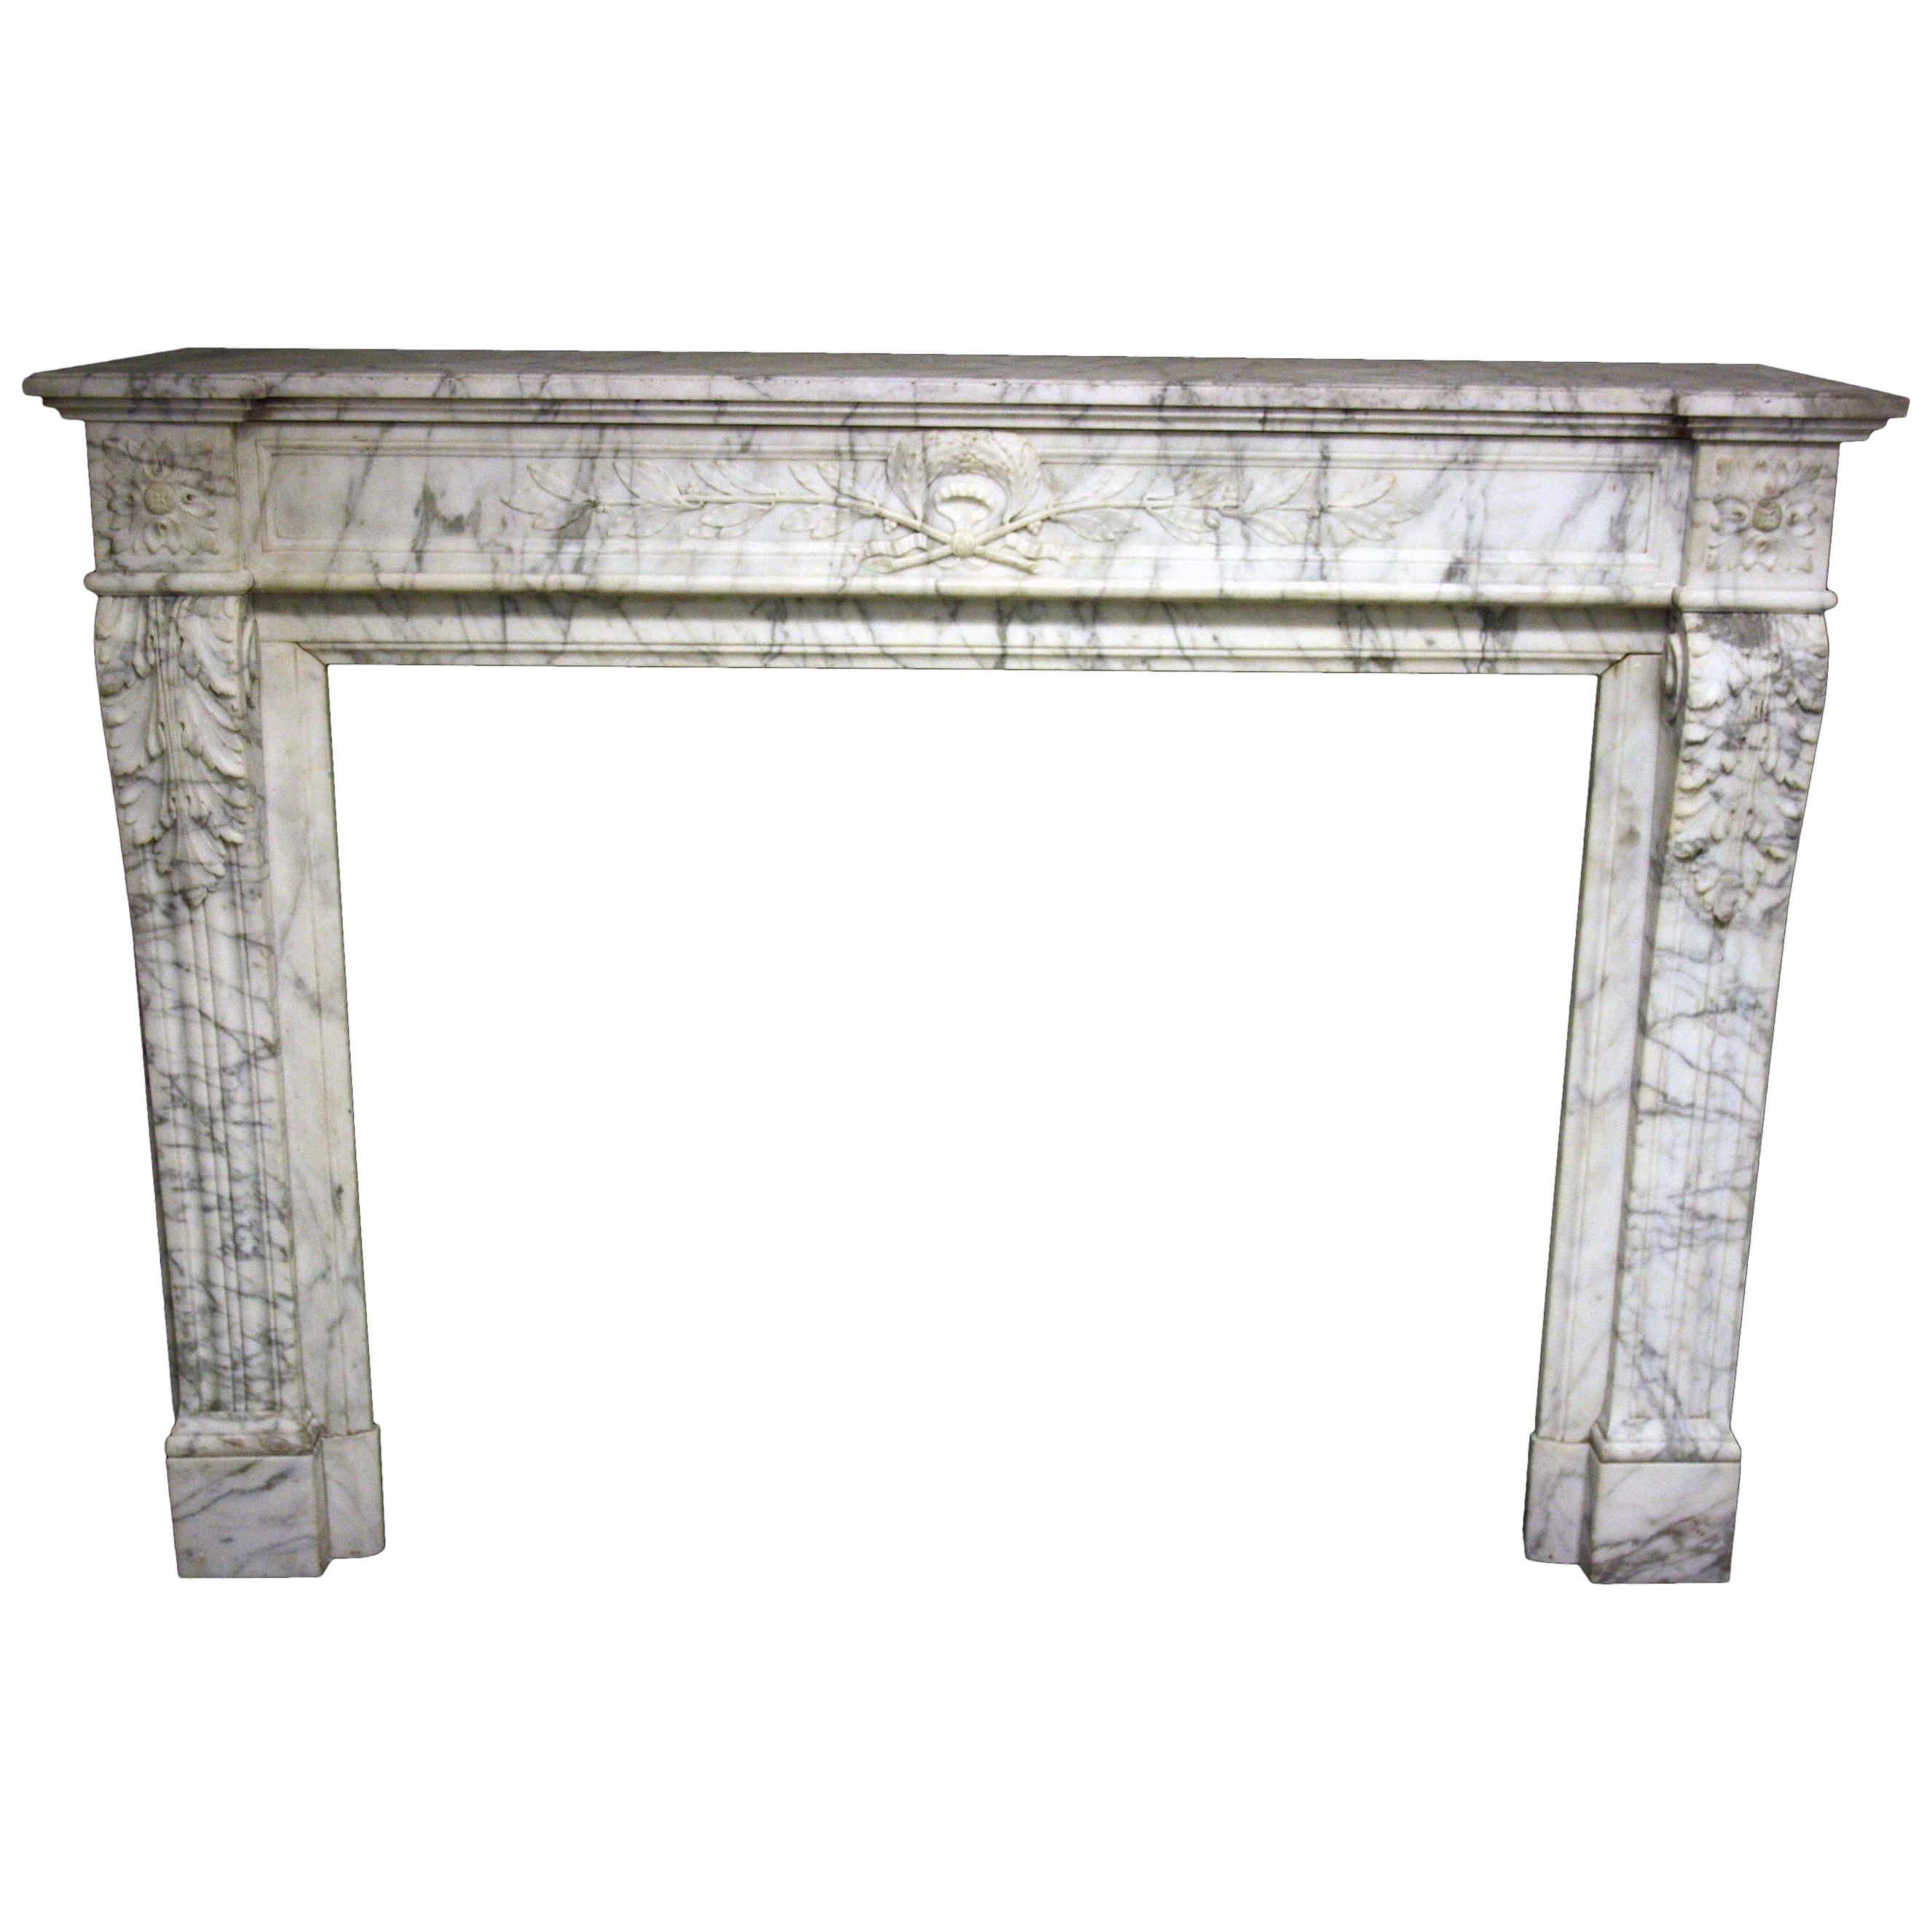 French 19th Century Carrara Marble Chimneypiece in the Louis XVI Manner